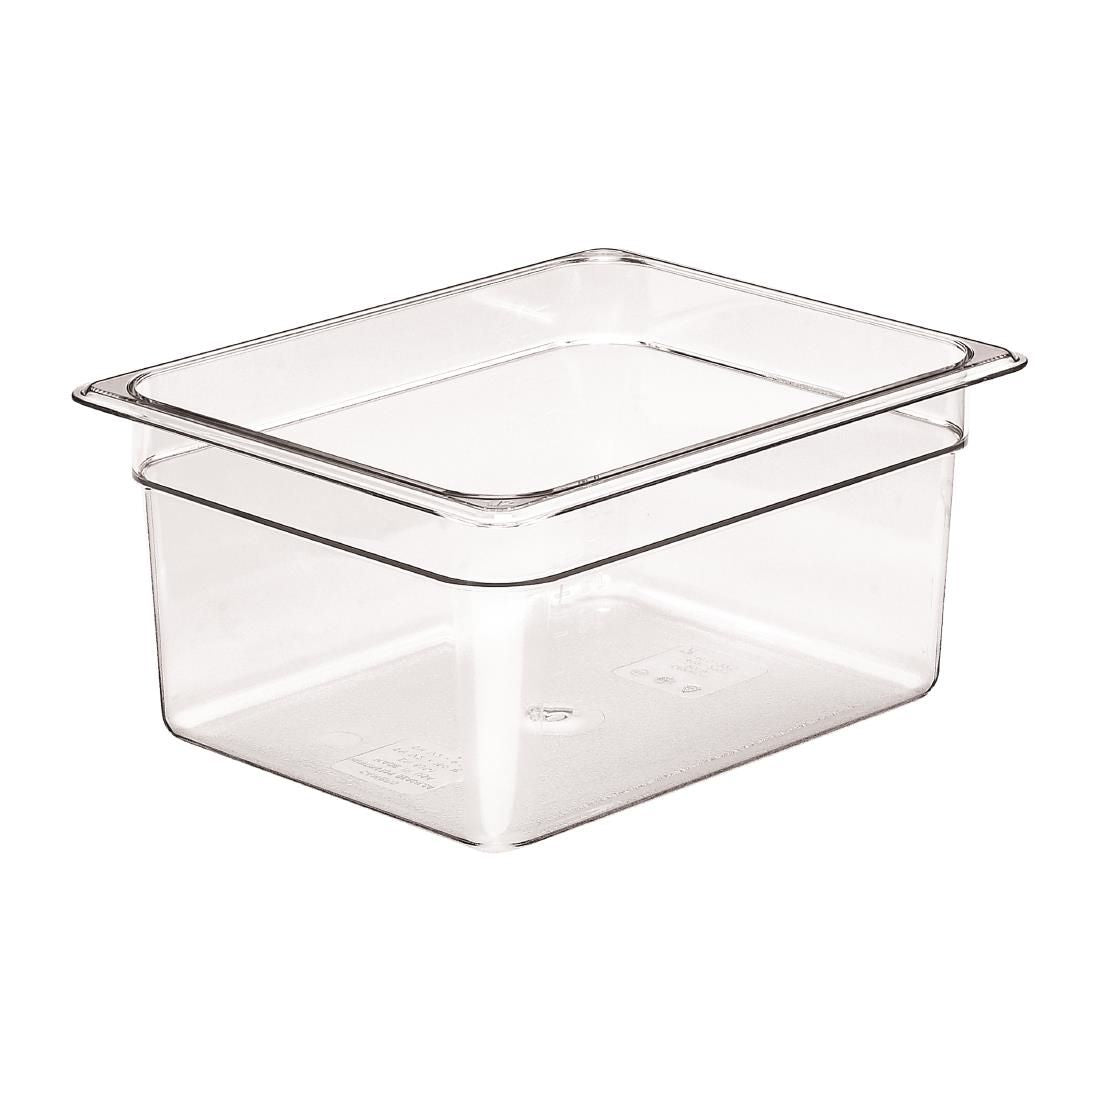 DM745 Cambro Polycarbonate 1/2 Gastronorm Pan 150mm JD Catering Equipment Solutions Ltd